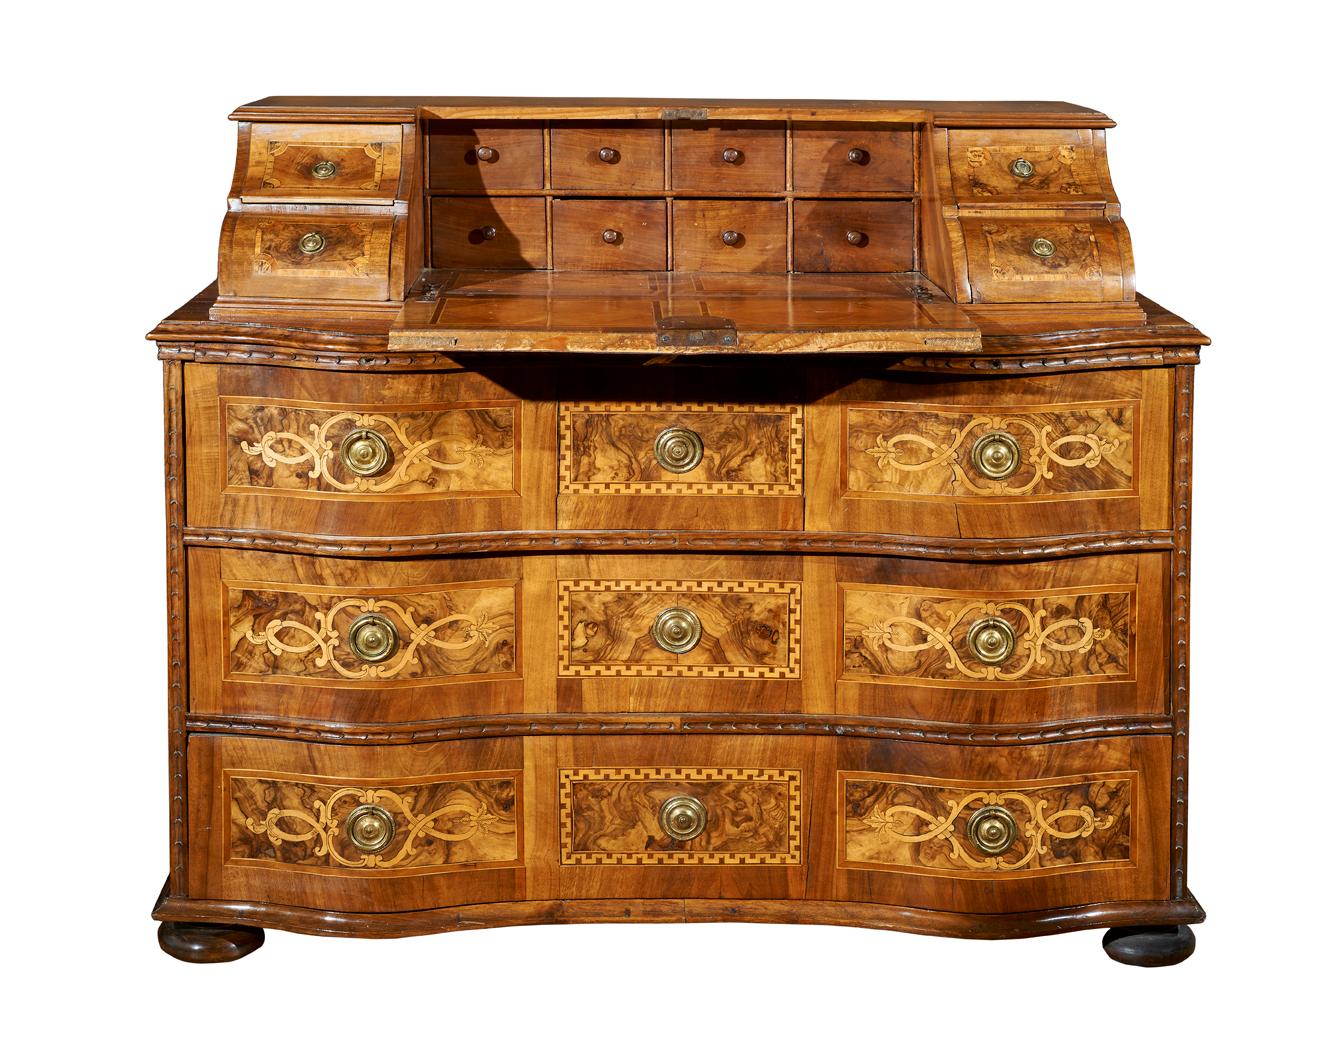 Bureau moved centrally and in the upper Louis XV inlaid in various woods measuring 115 x 125 x 60 cm.
Noble bureau of fine workmanship entirely inlaid with elegant geometric and floral motifs on the entire surface, in walnut, thuja, maple, cherry